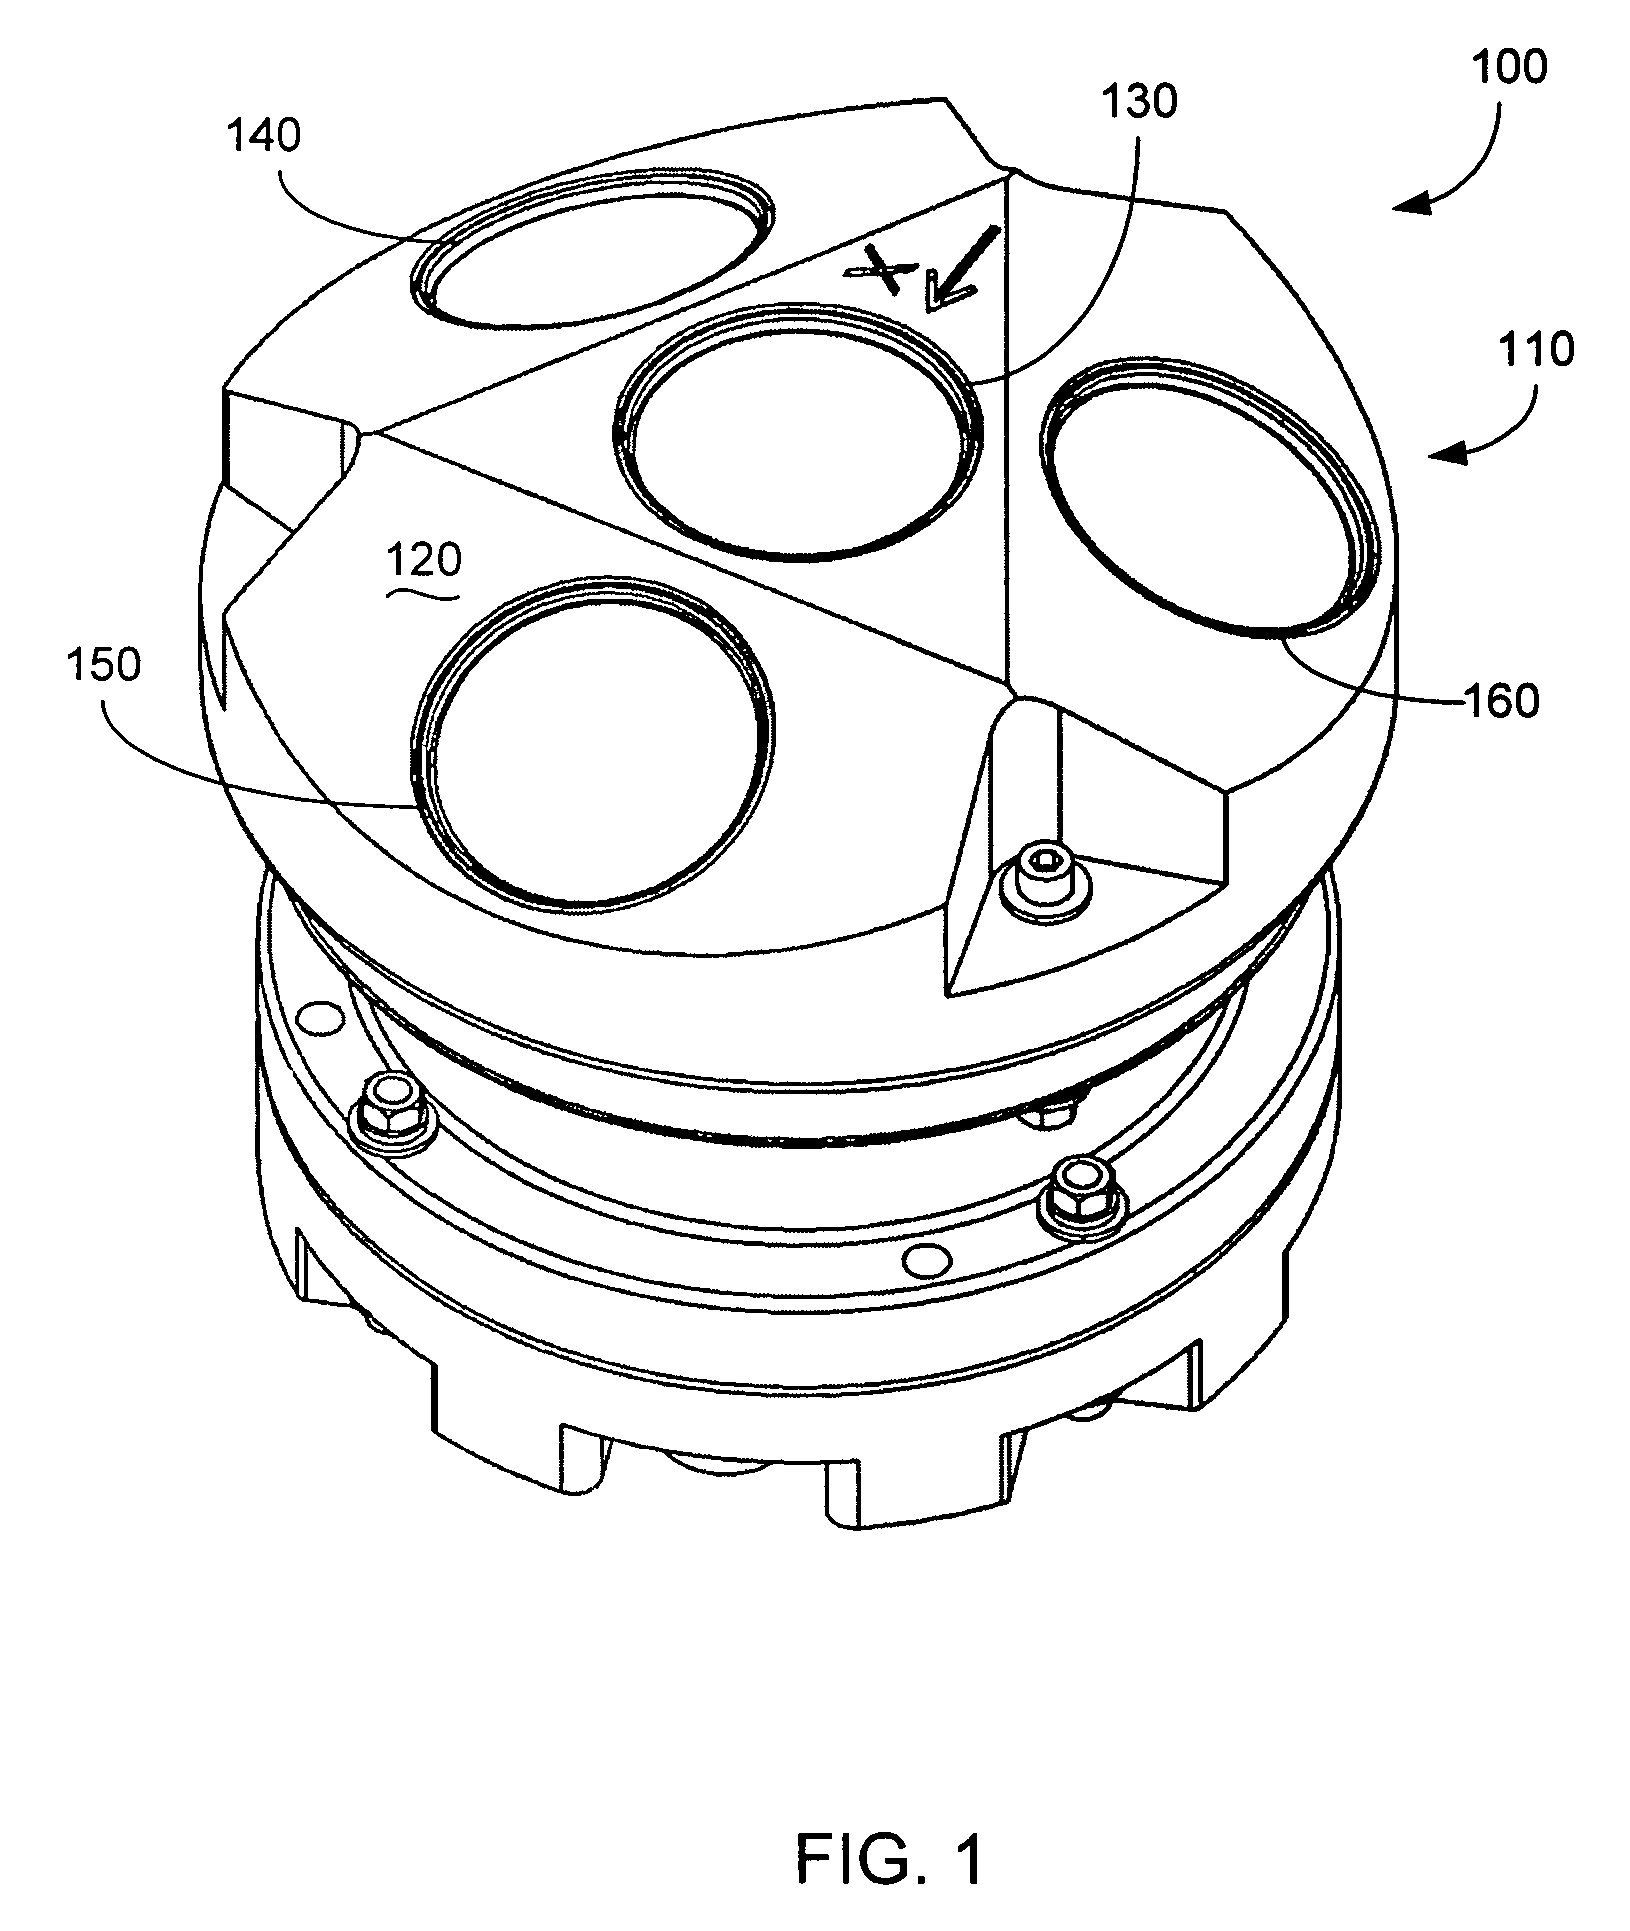 System and method for determining directional and non-directional fluid wave and current measurements